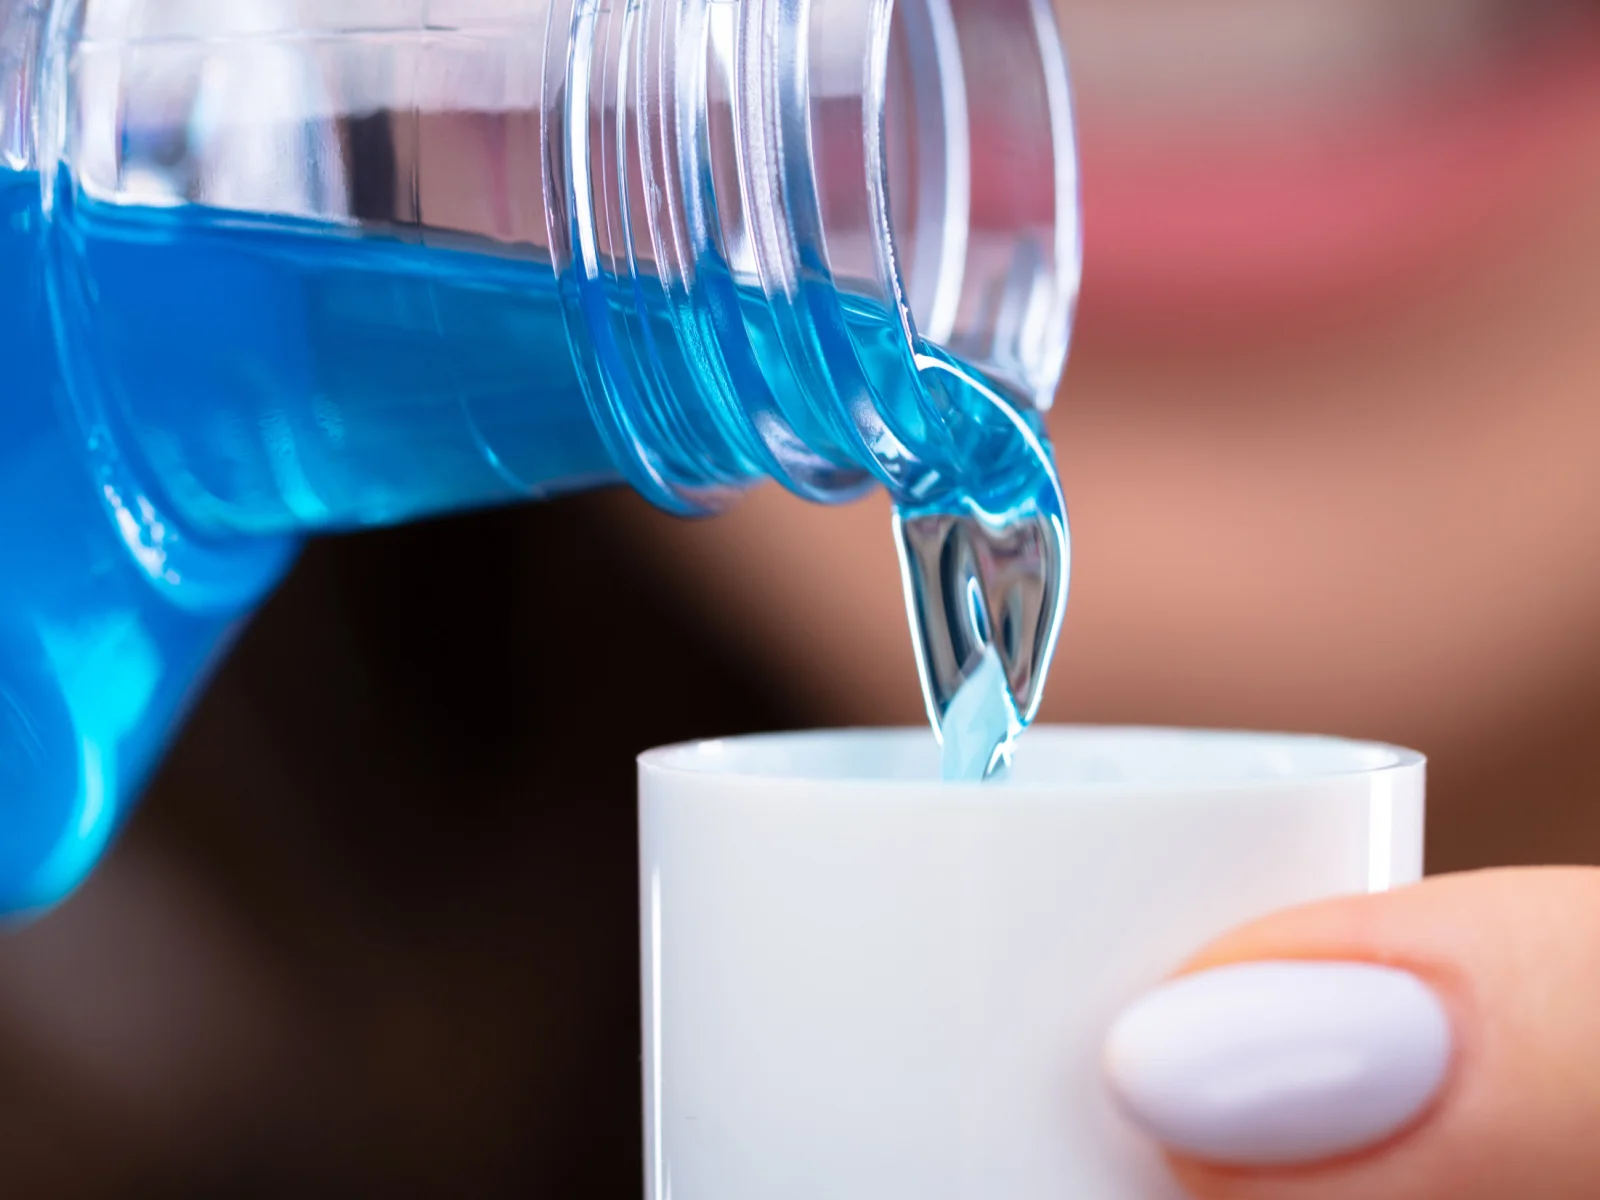 Can Mouthwash or Hand Sanitiser Cause a Positive PEth Test?